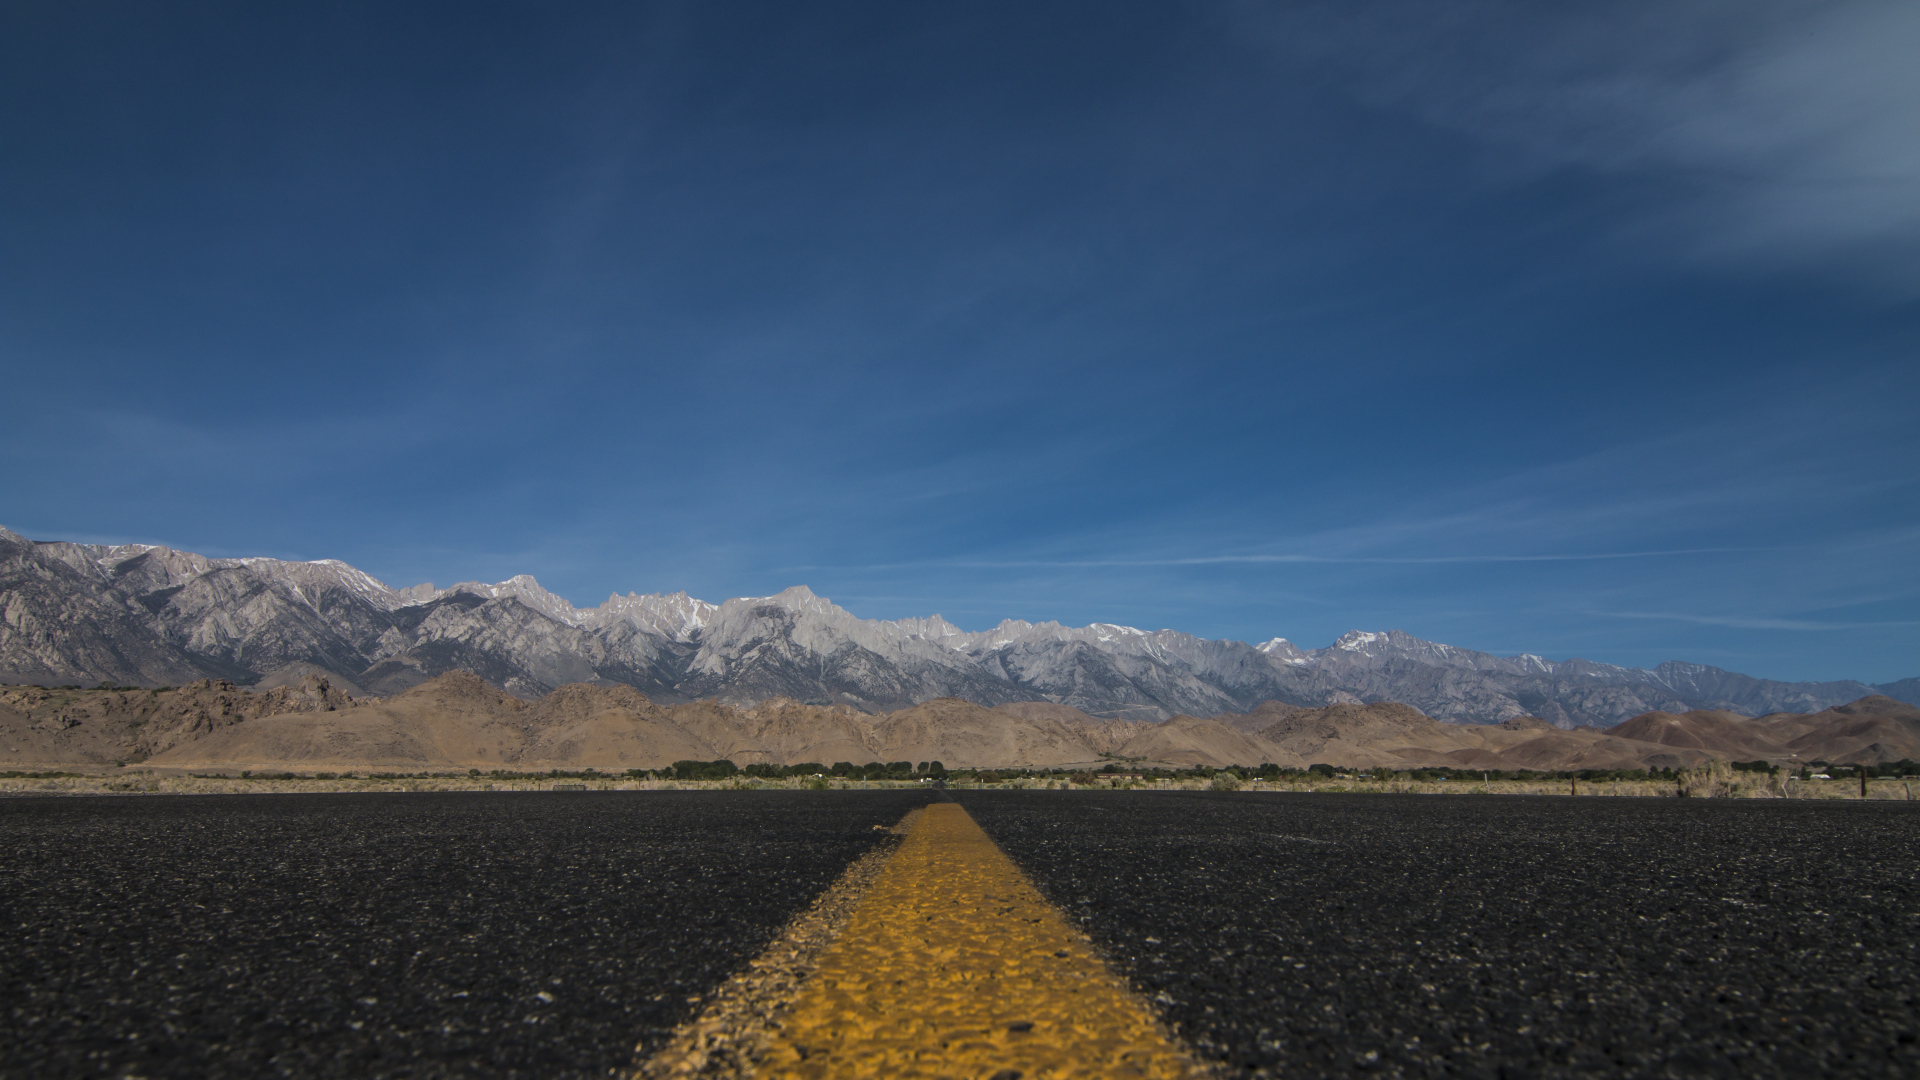 Asphalt road on a background of mountains